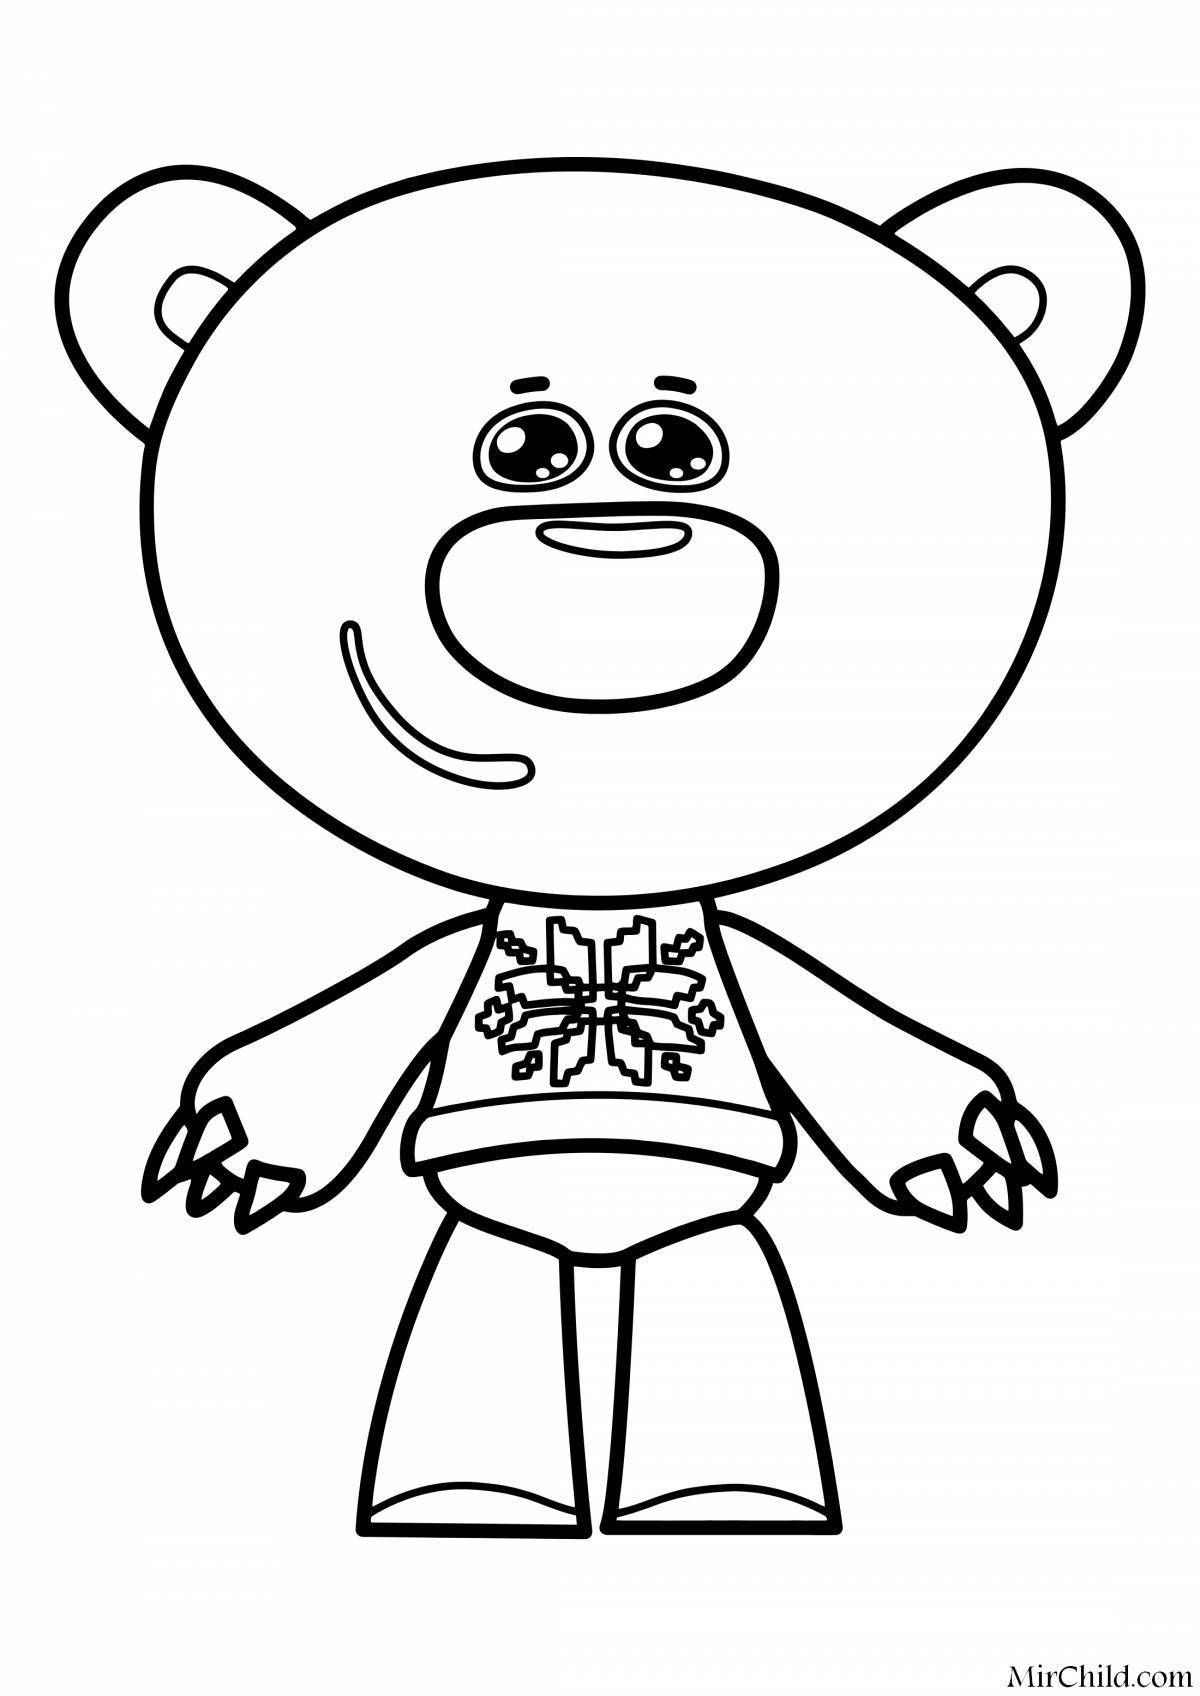 Large bears coloring pages